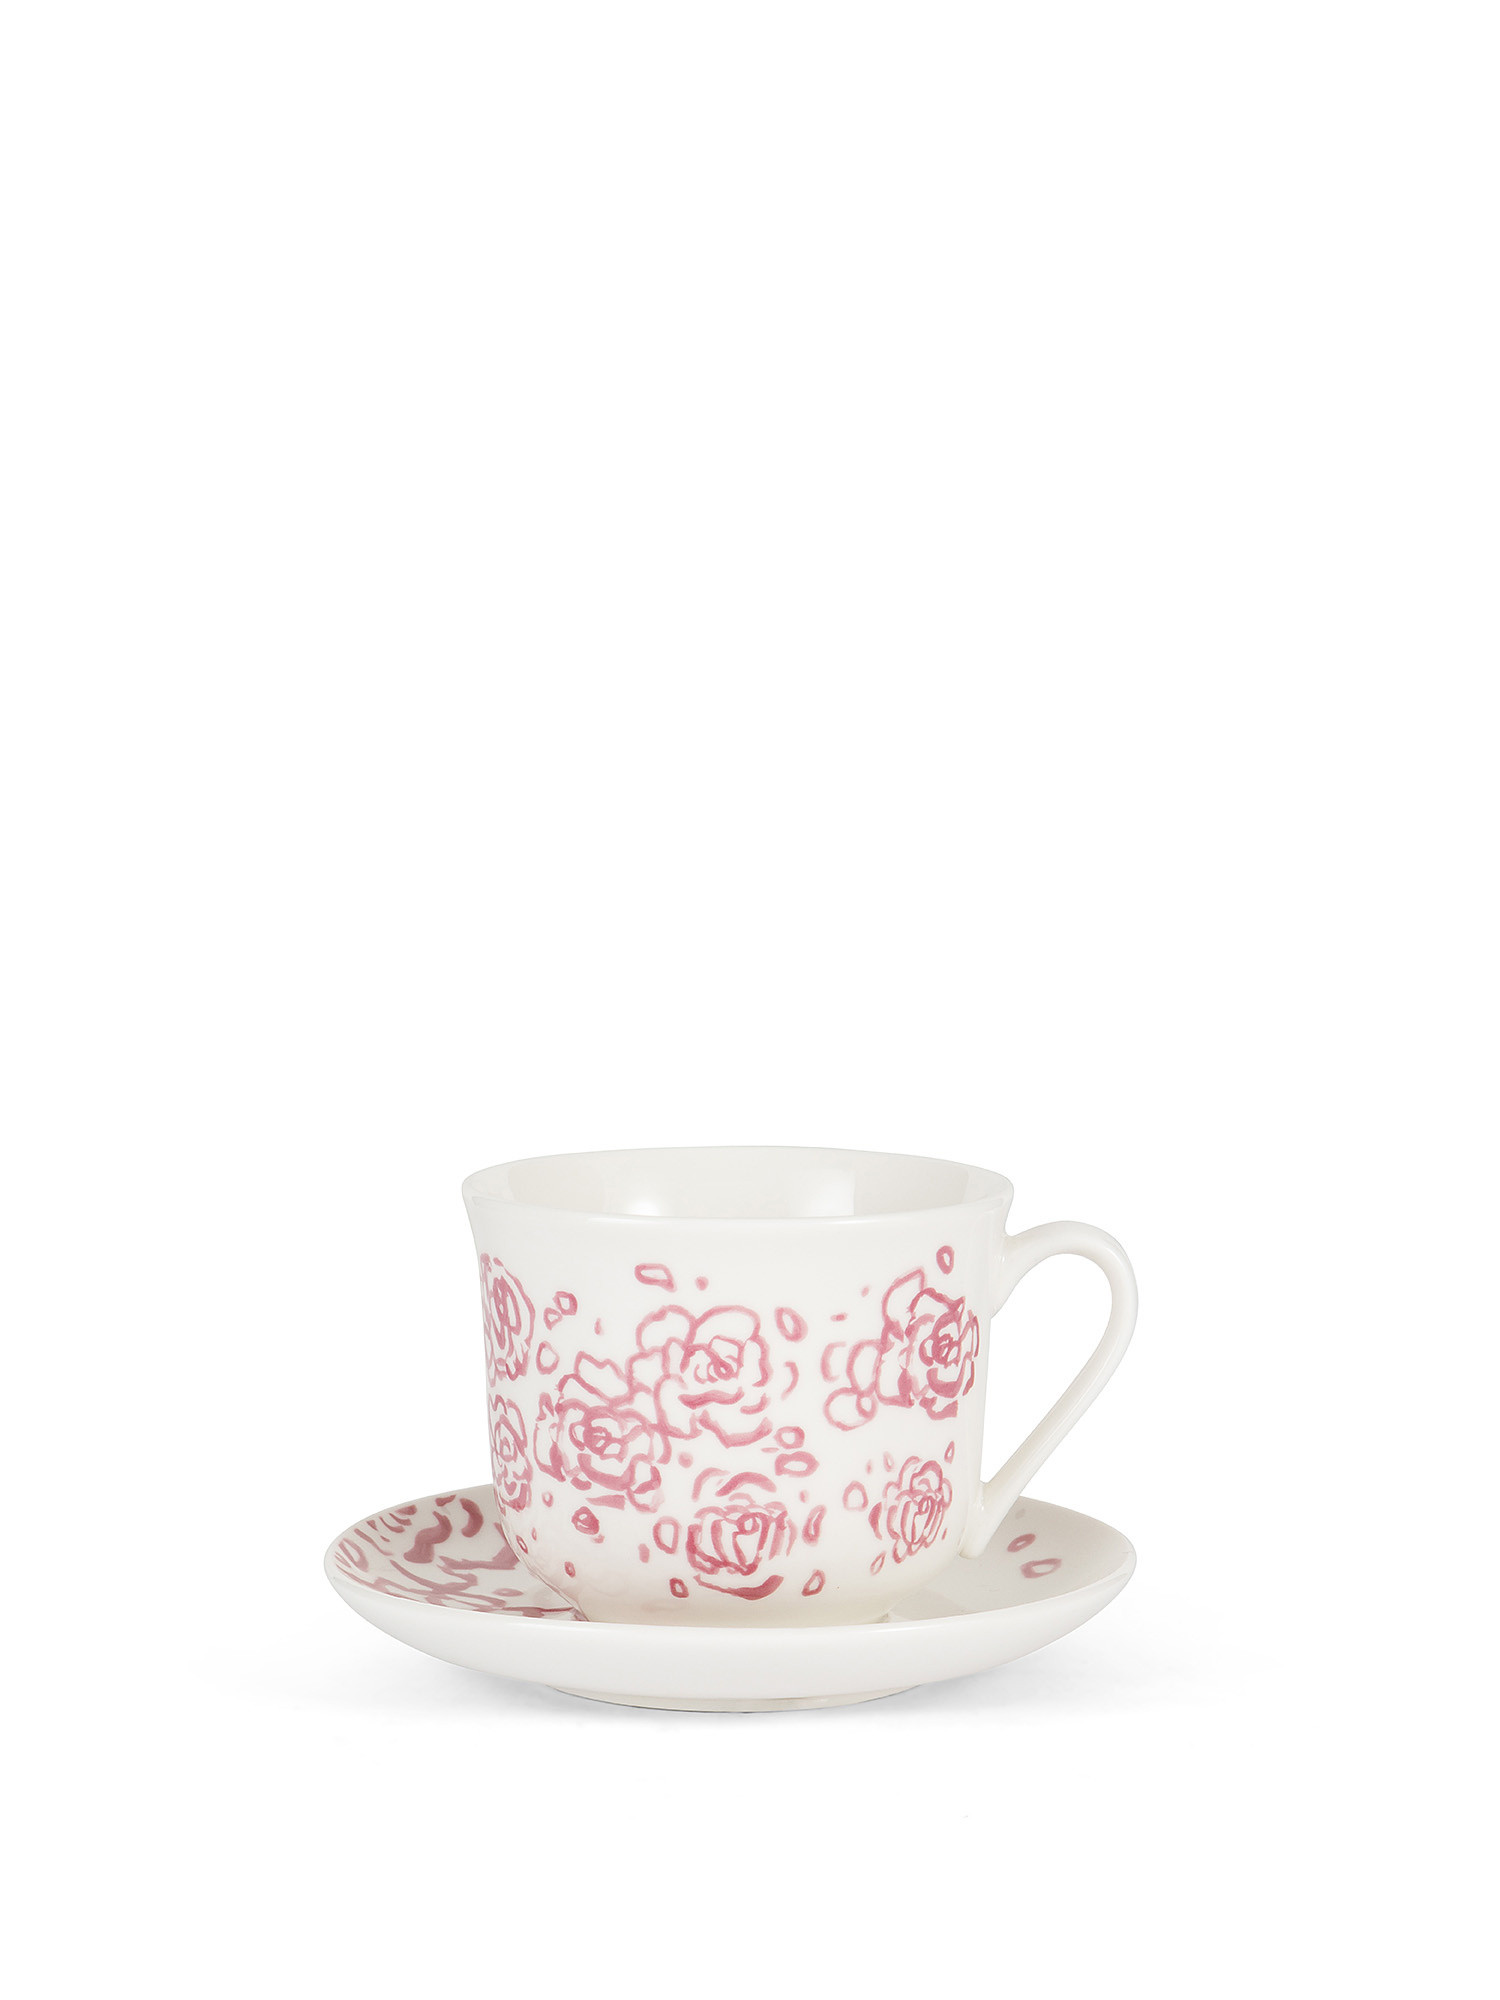 New bone china breakfast cup with roses decoration, White, large image number 0